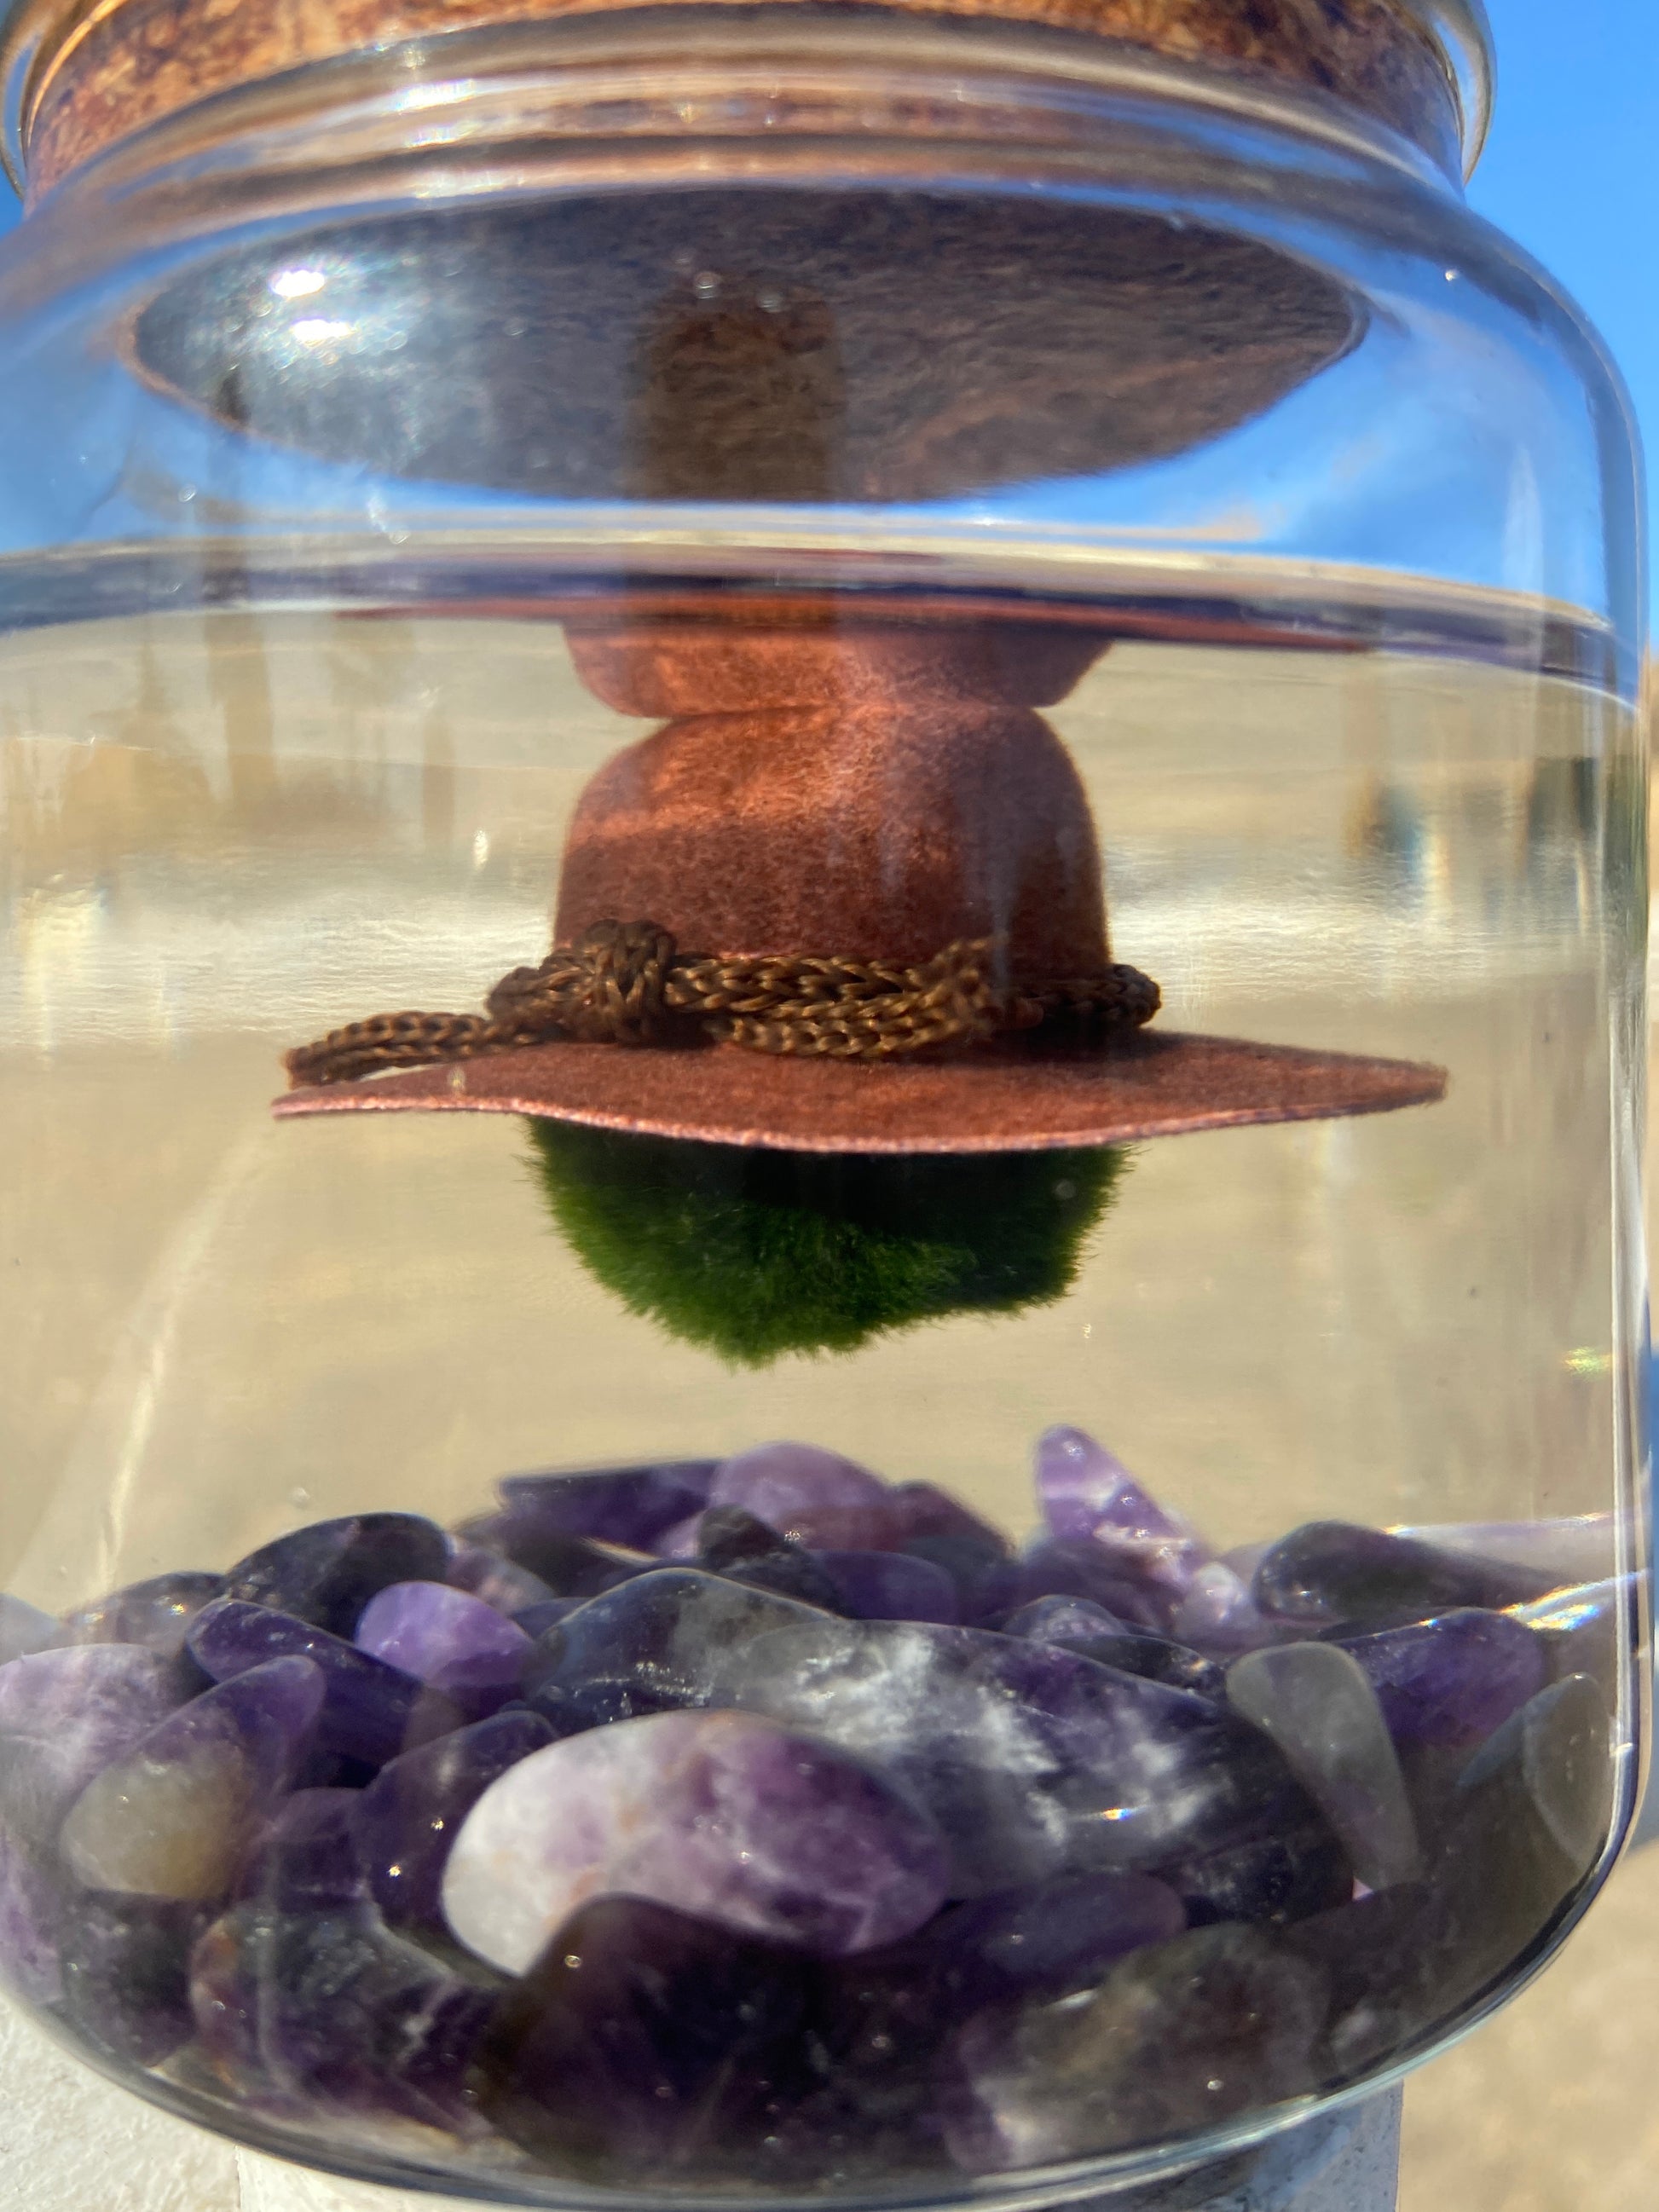 Country Hat – Moss Amigos